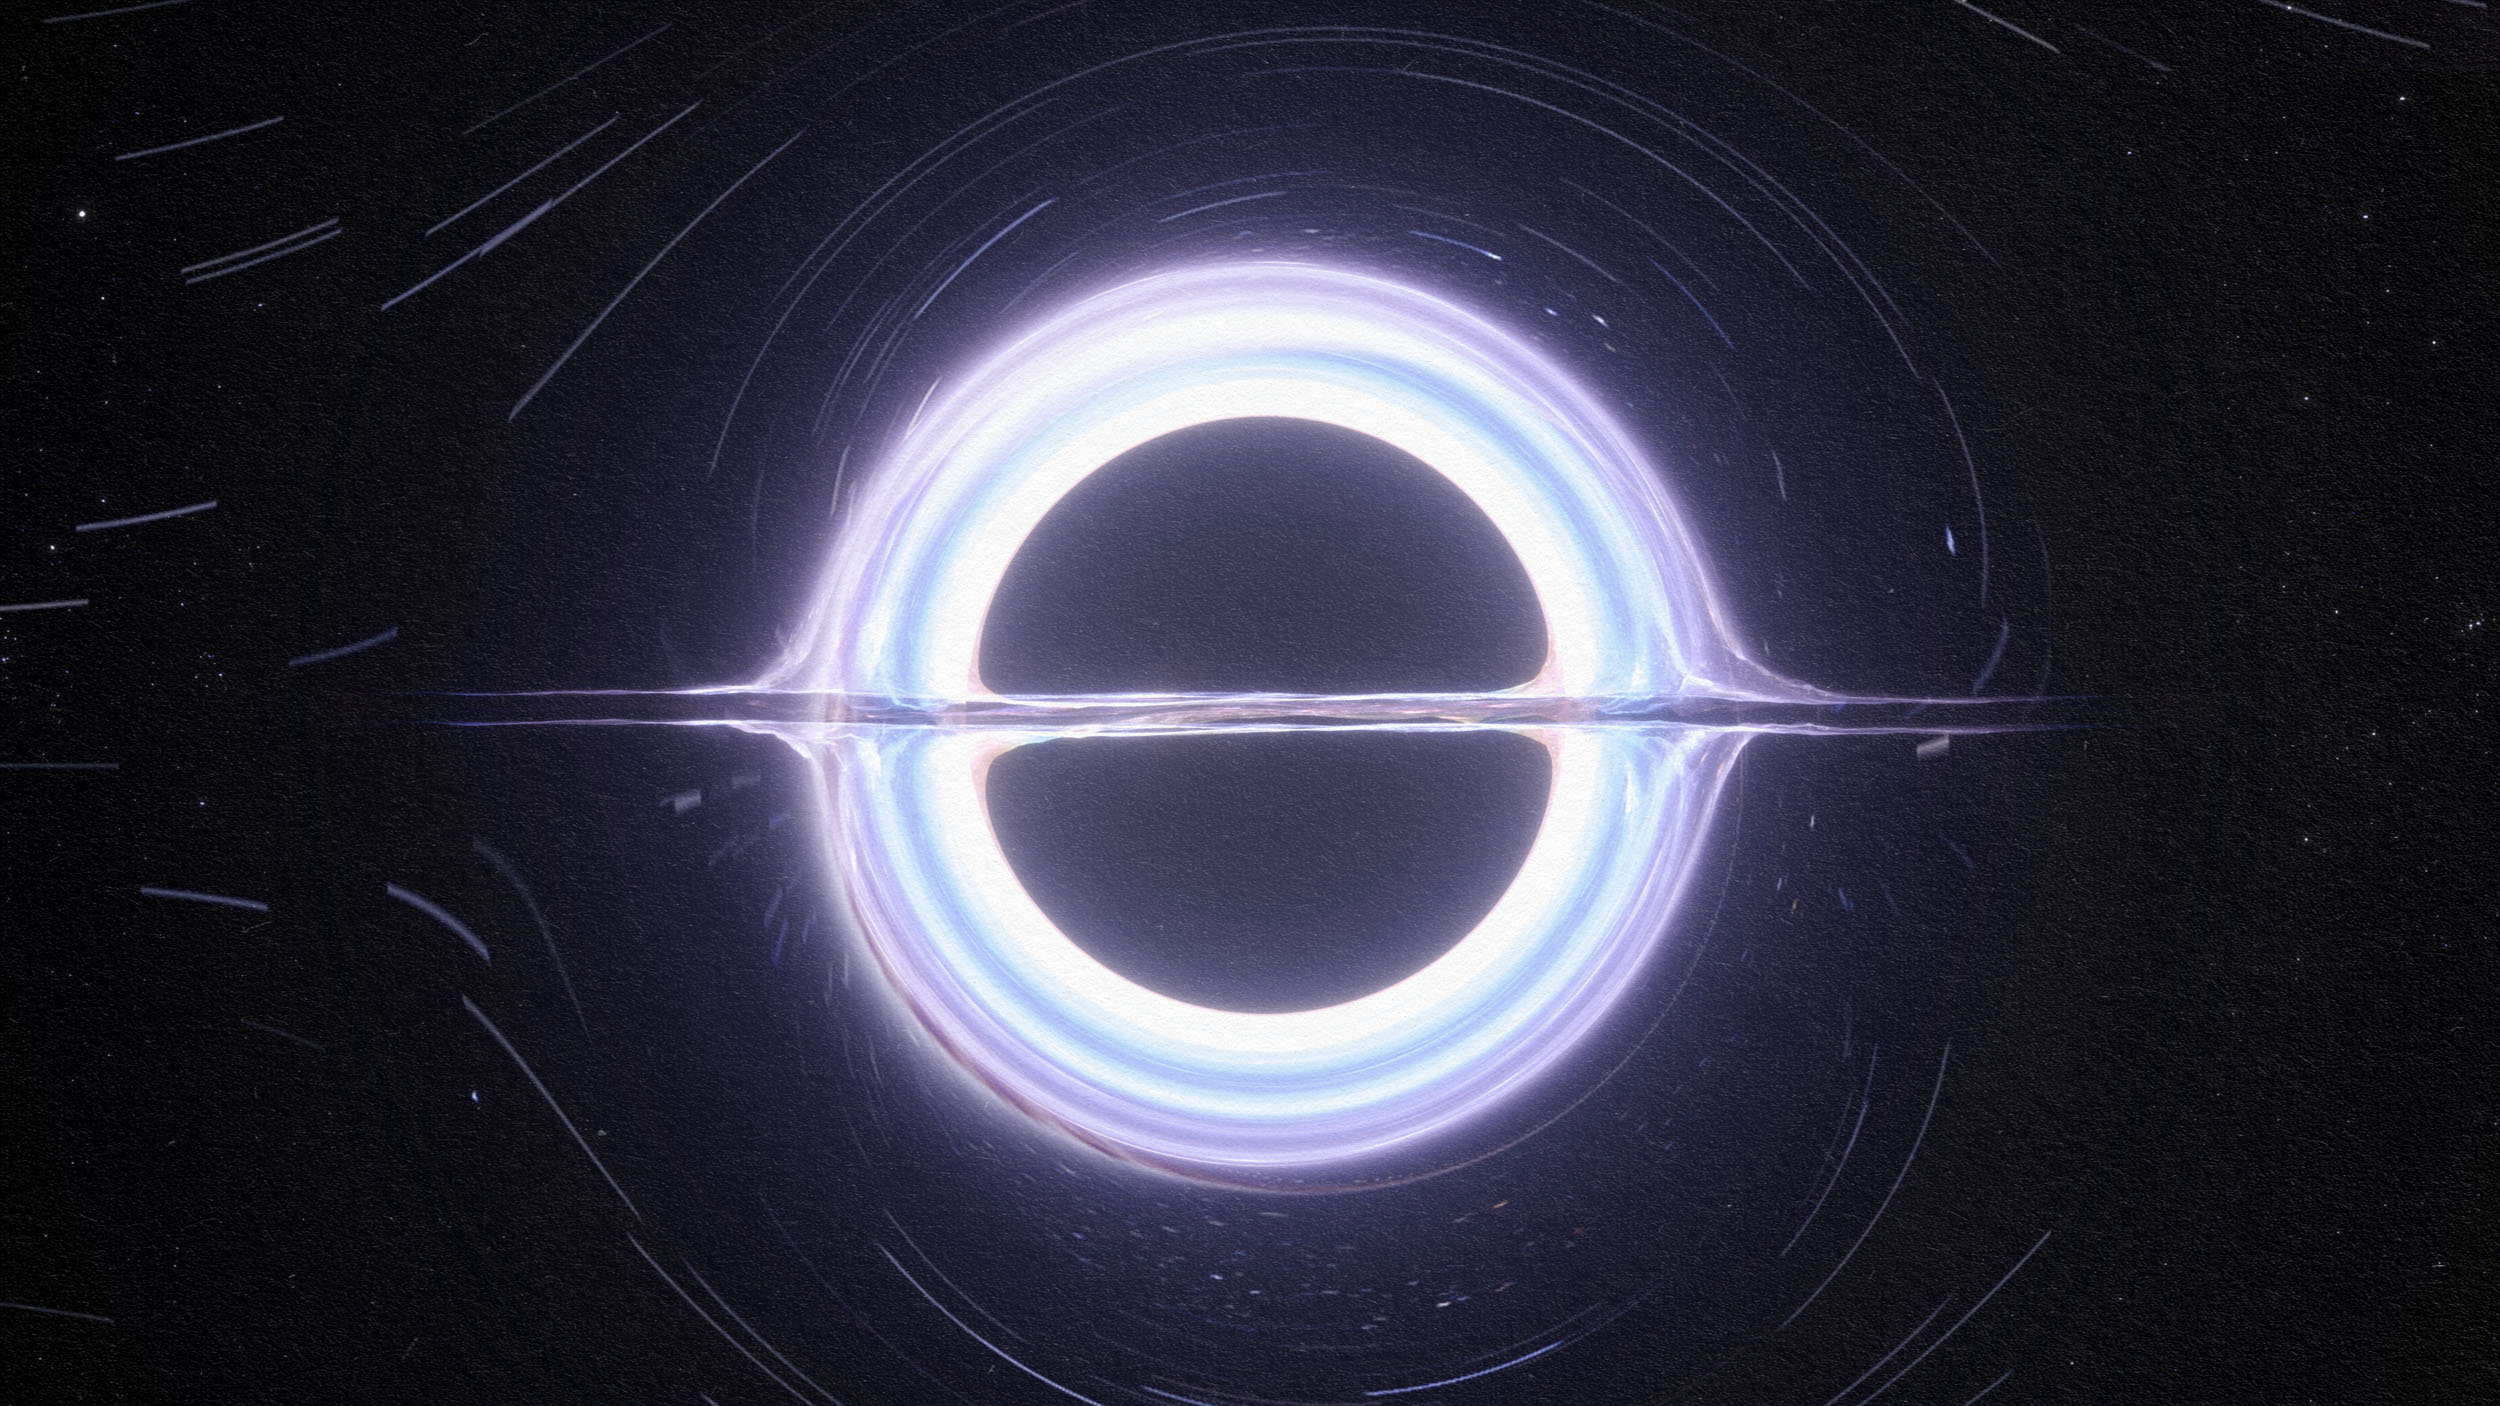 An image of an e - ring in space.